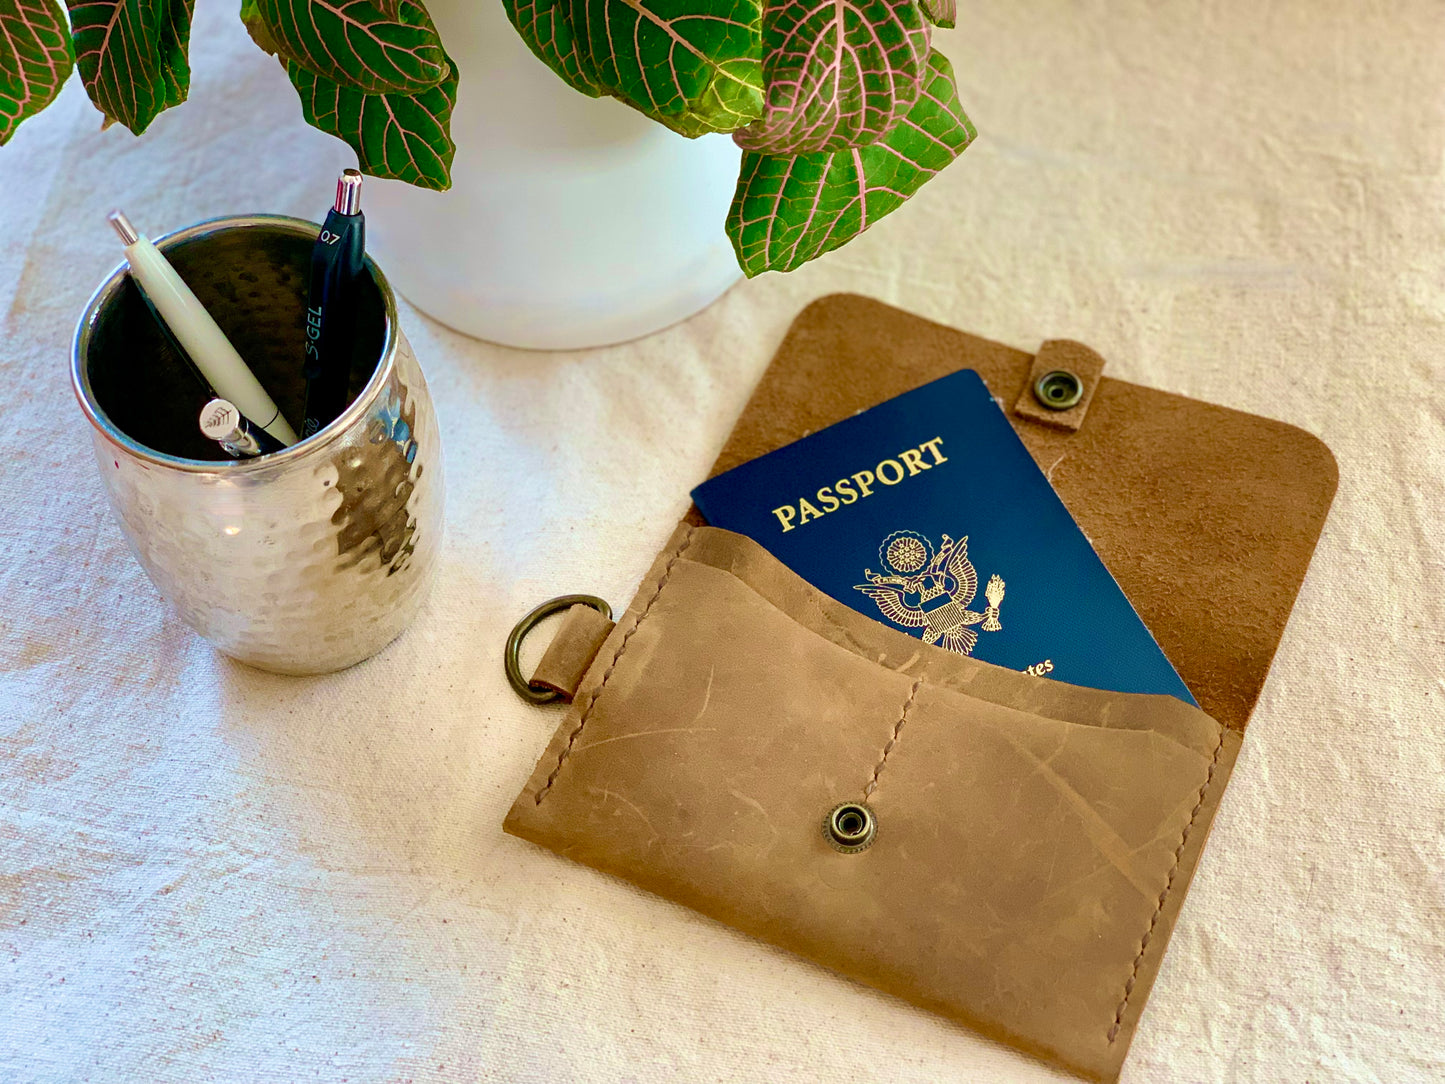 DIY Leather Passport Covers